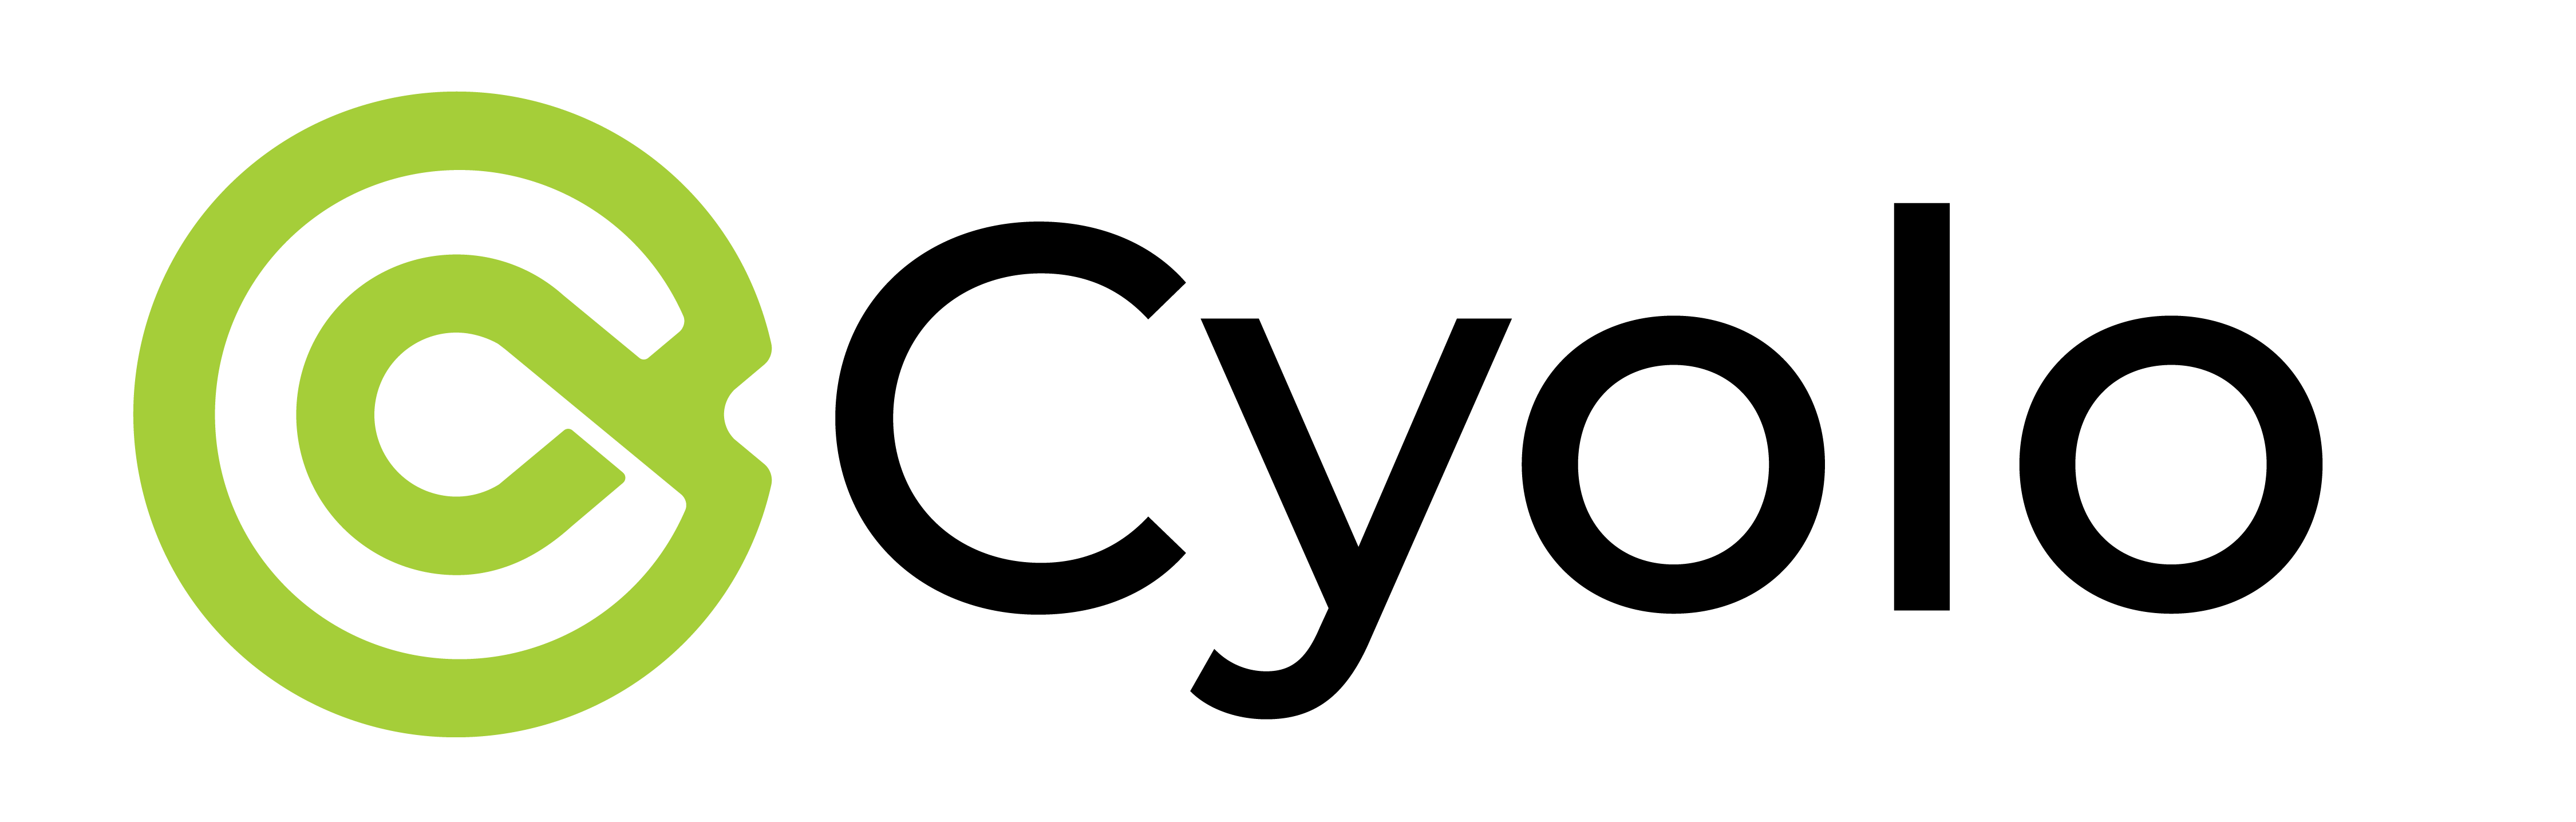 Cylo cyber security partnership with dragos ot cyber security